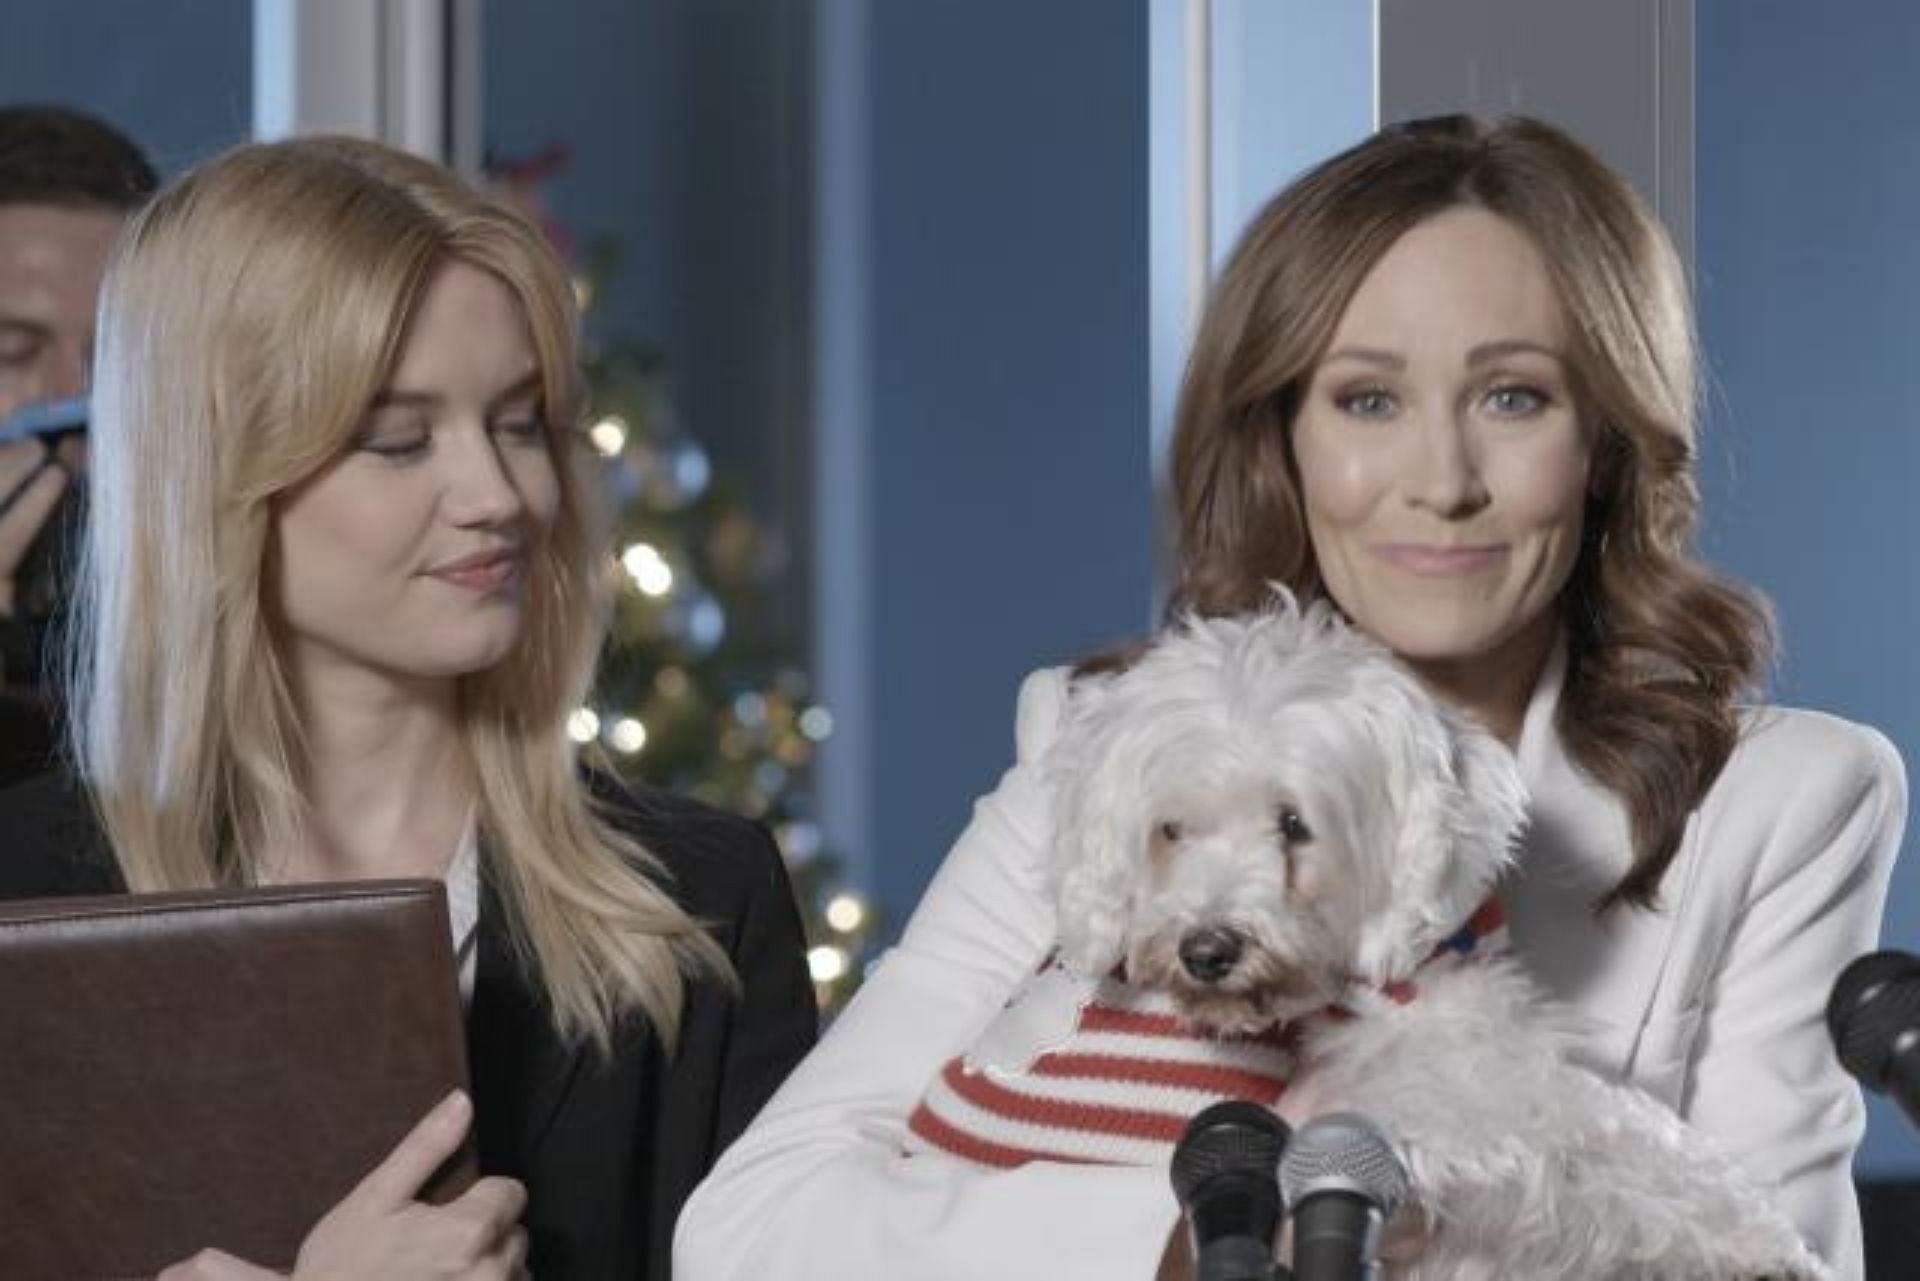 Dognapped: Hound for the Holidays (Image via ION Television)